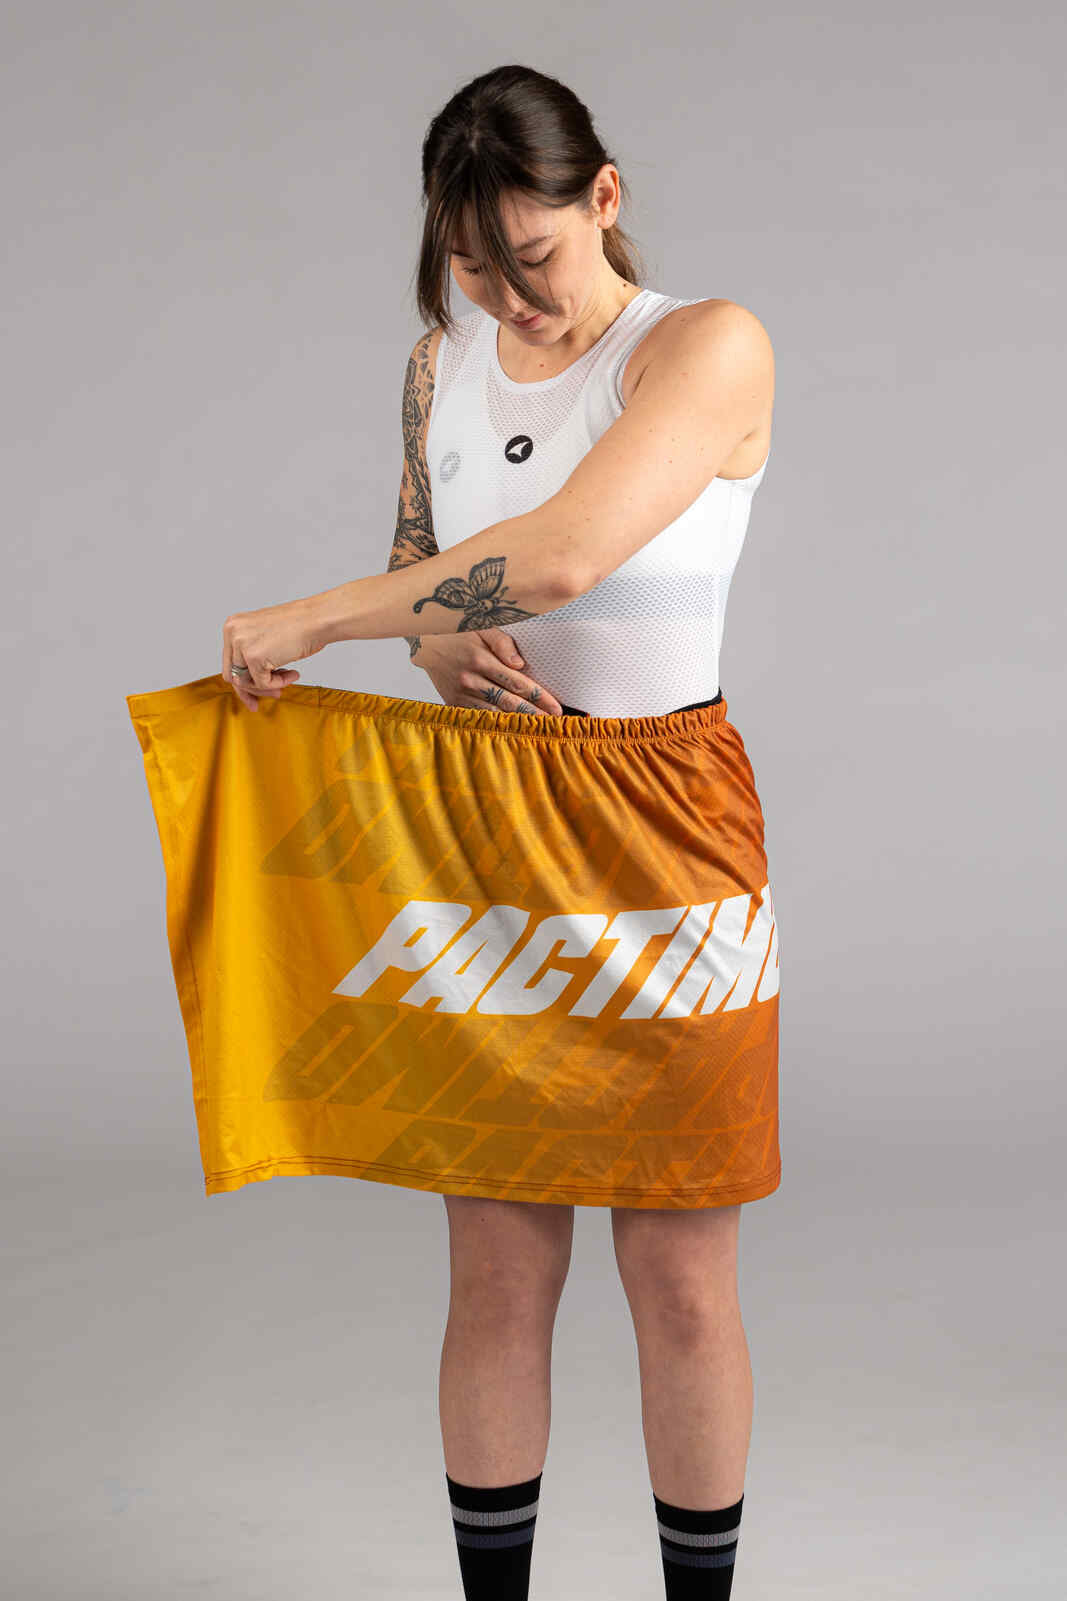 Cyclist putting on a Yellow Quick Release Cycling Changing Kilt